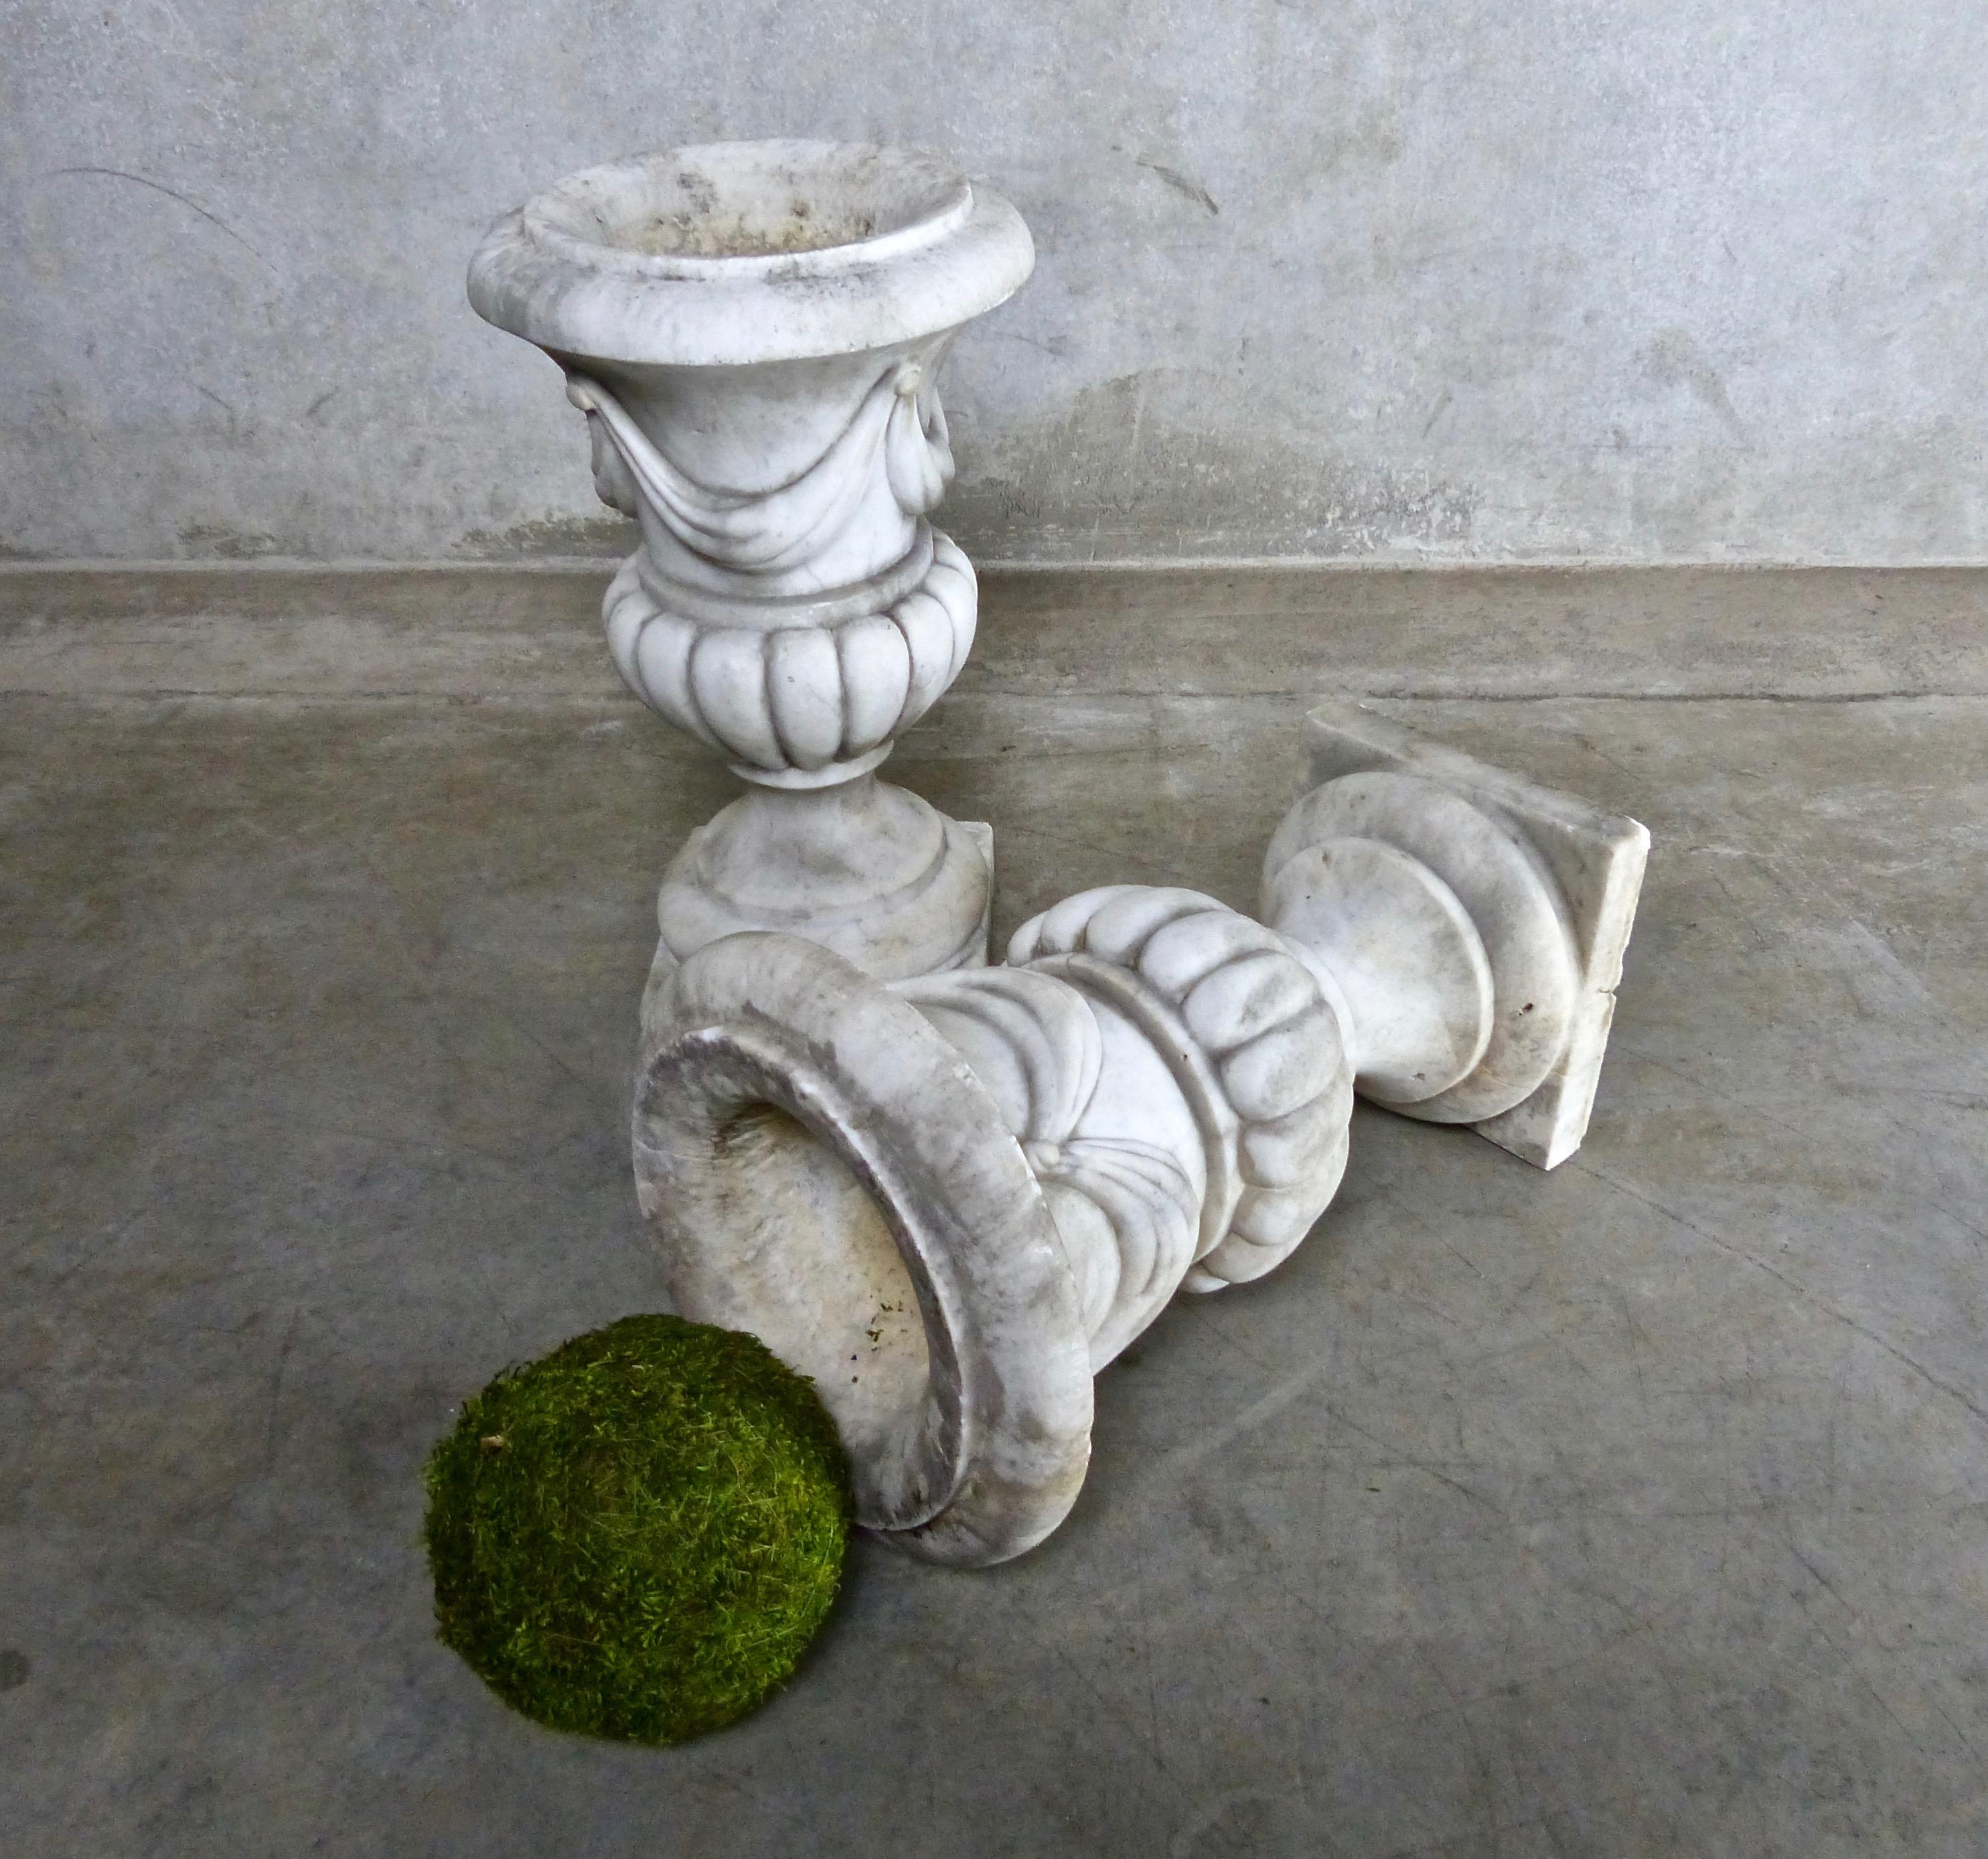 A matched pair of petite, hand carved, solid white marble garden urns/planters/jardinières. Neoclassical Revival Campana (bell-shaped) form with attached pedestal base. Dimensions 17” height x 10” diameter.
 